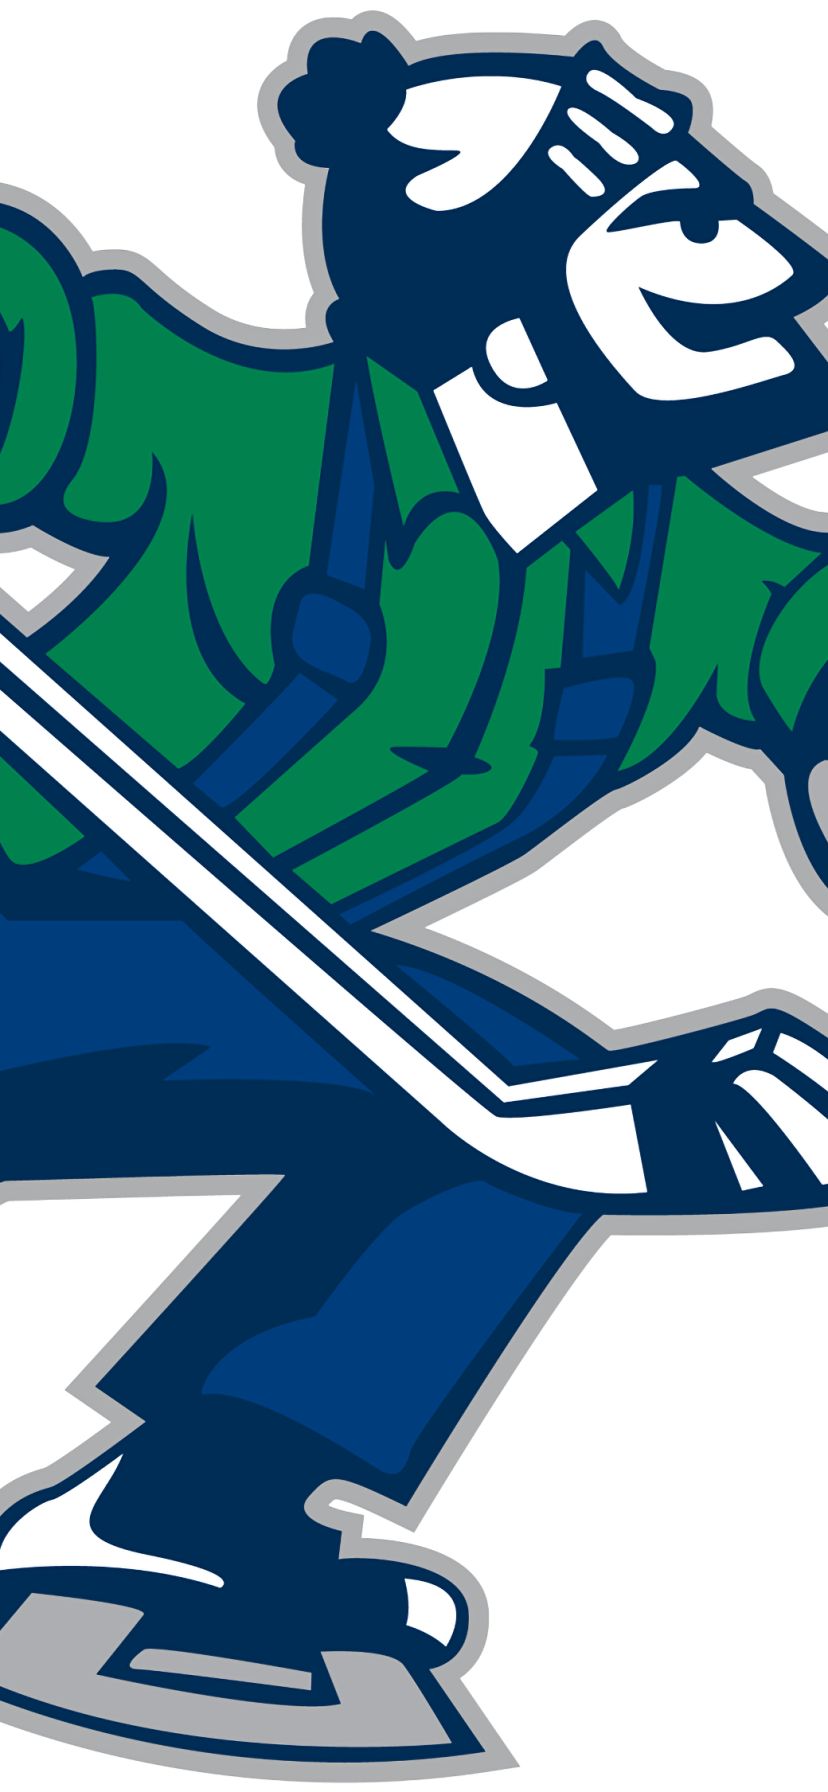 Vancouver Canucks wallpaper by byretep - Download on ZEDGE™